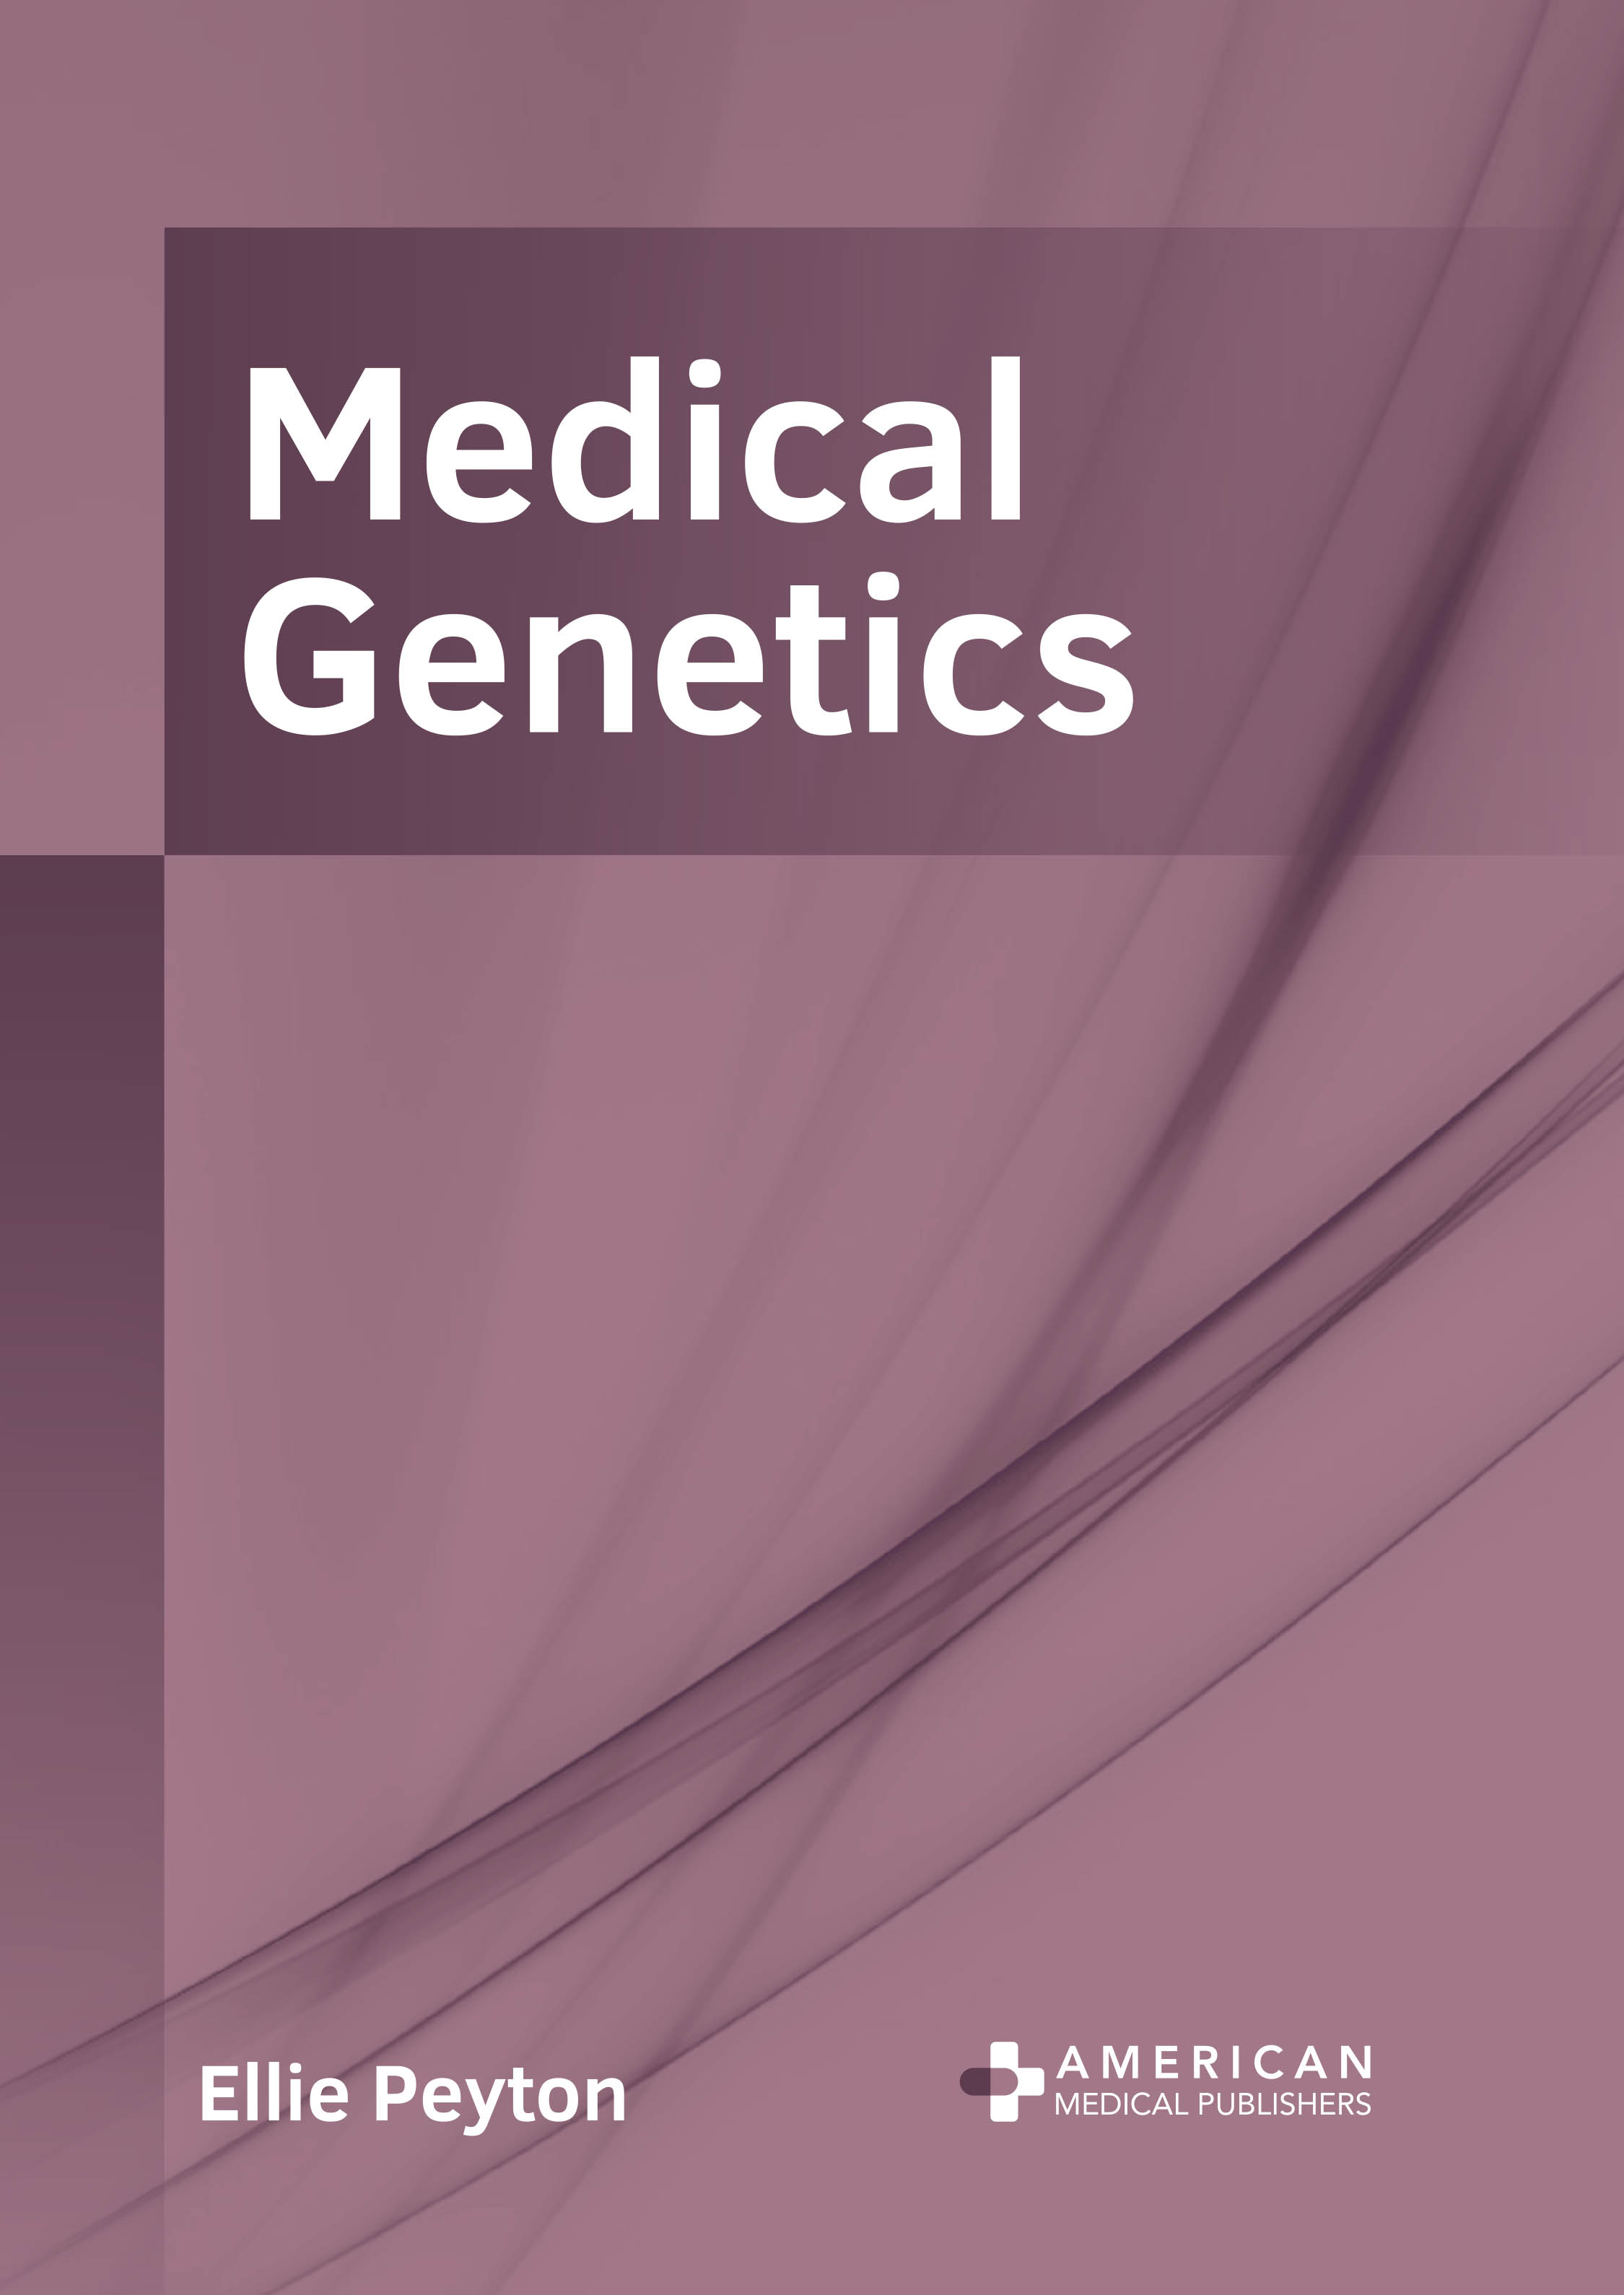 

exclusive-publishers/american-medical-publishers/medical-genetics-9781639272563